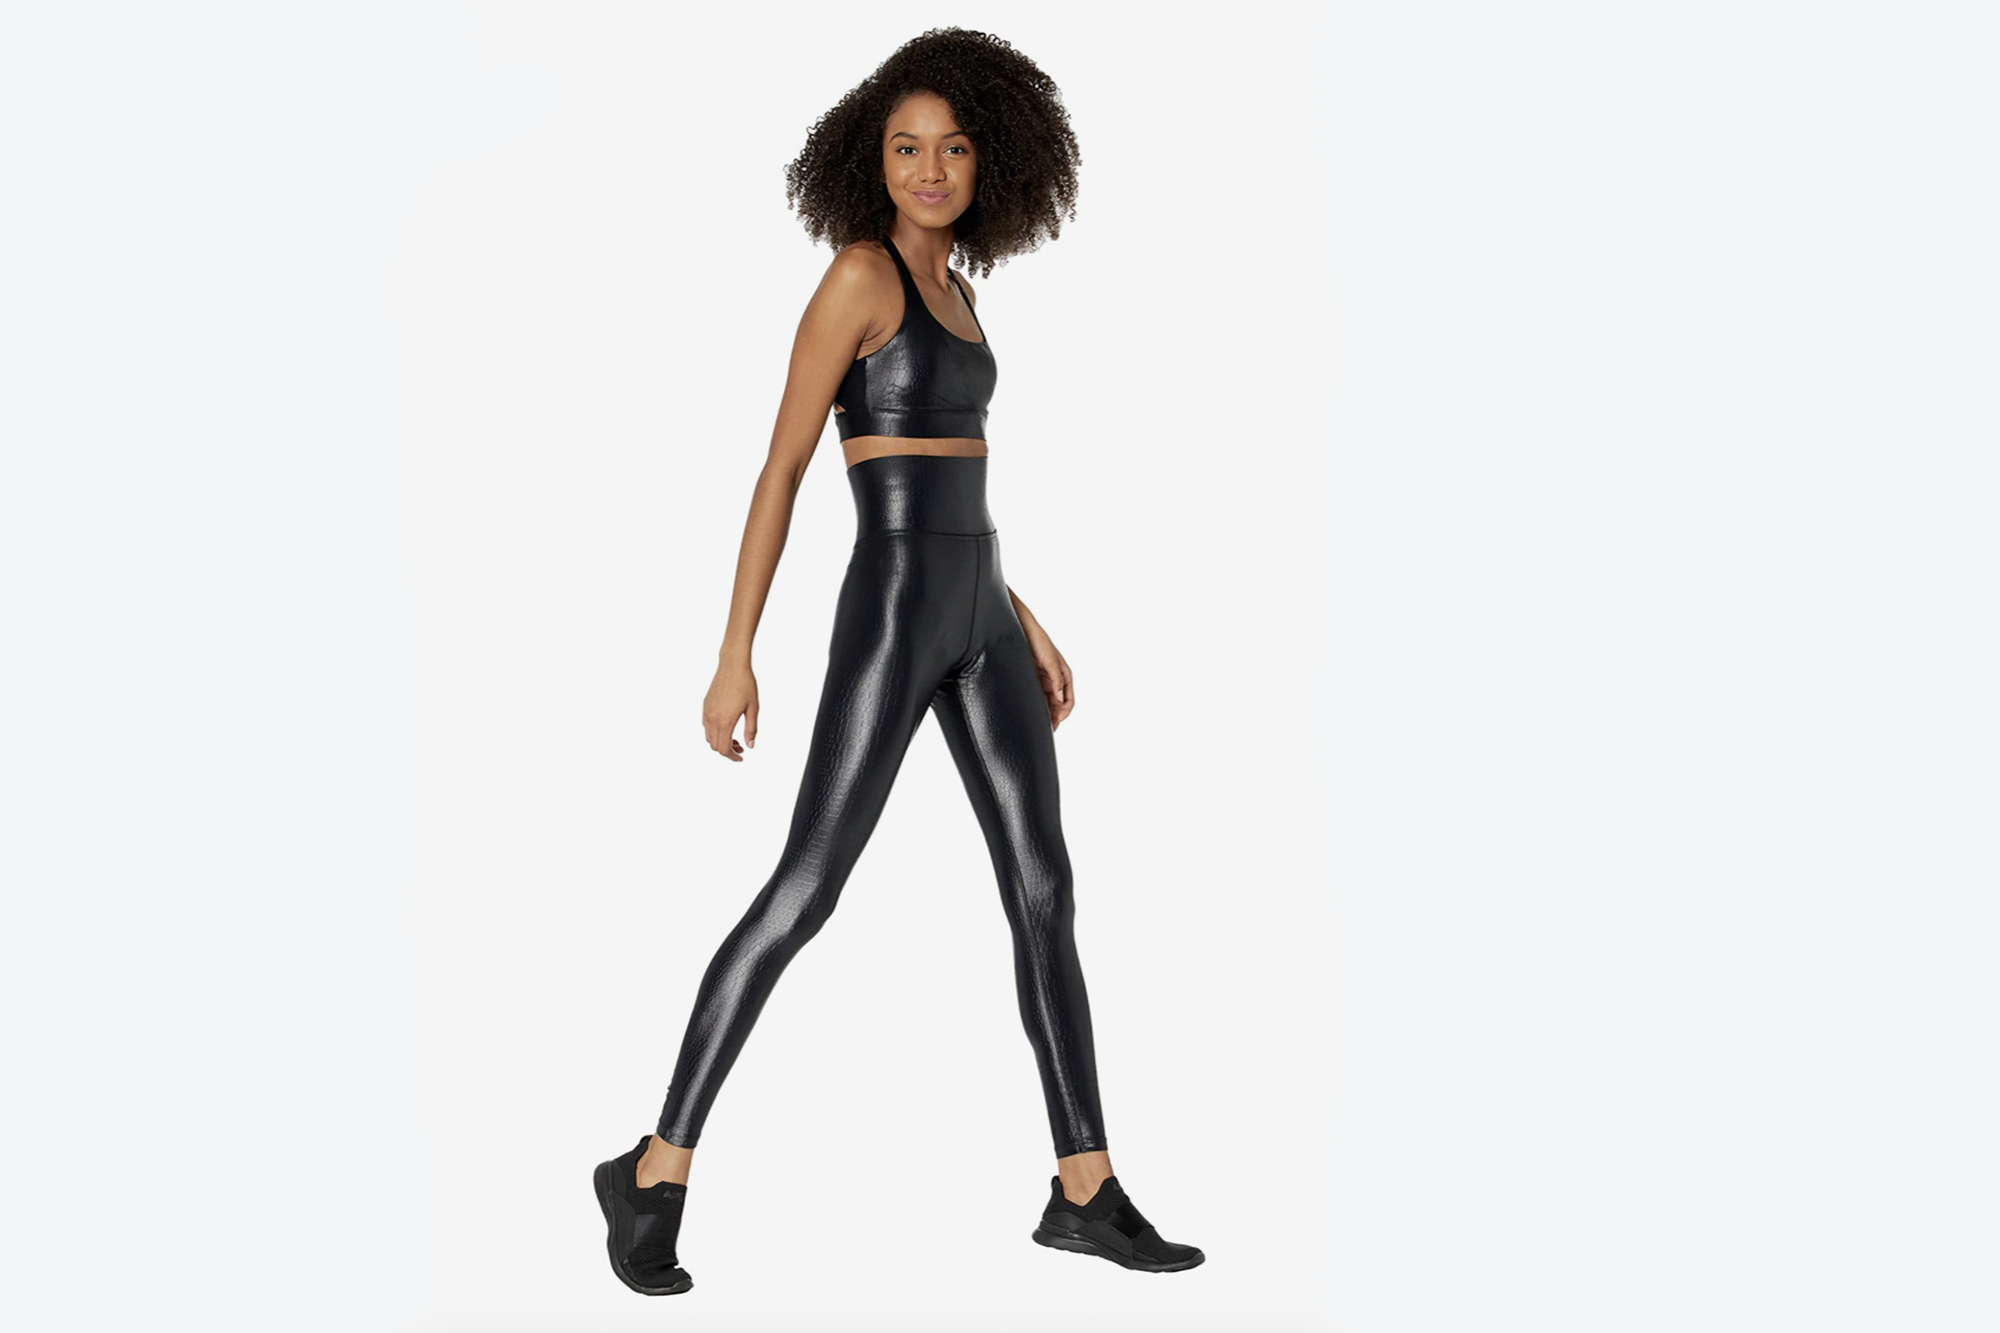 Rock These Carbon38 Faux-Leather Leggings From Barre to the